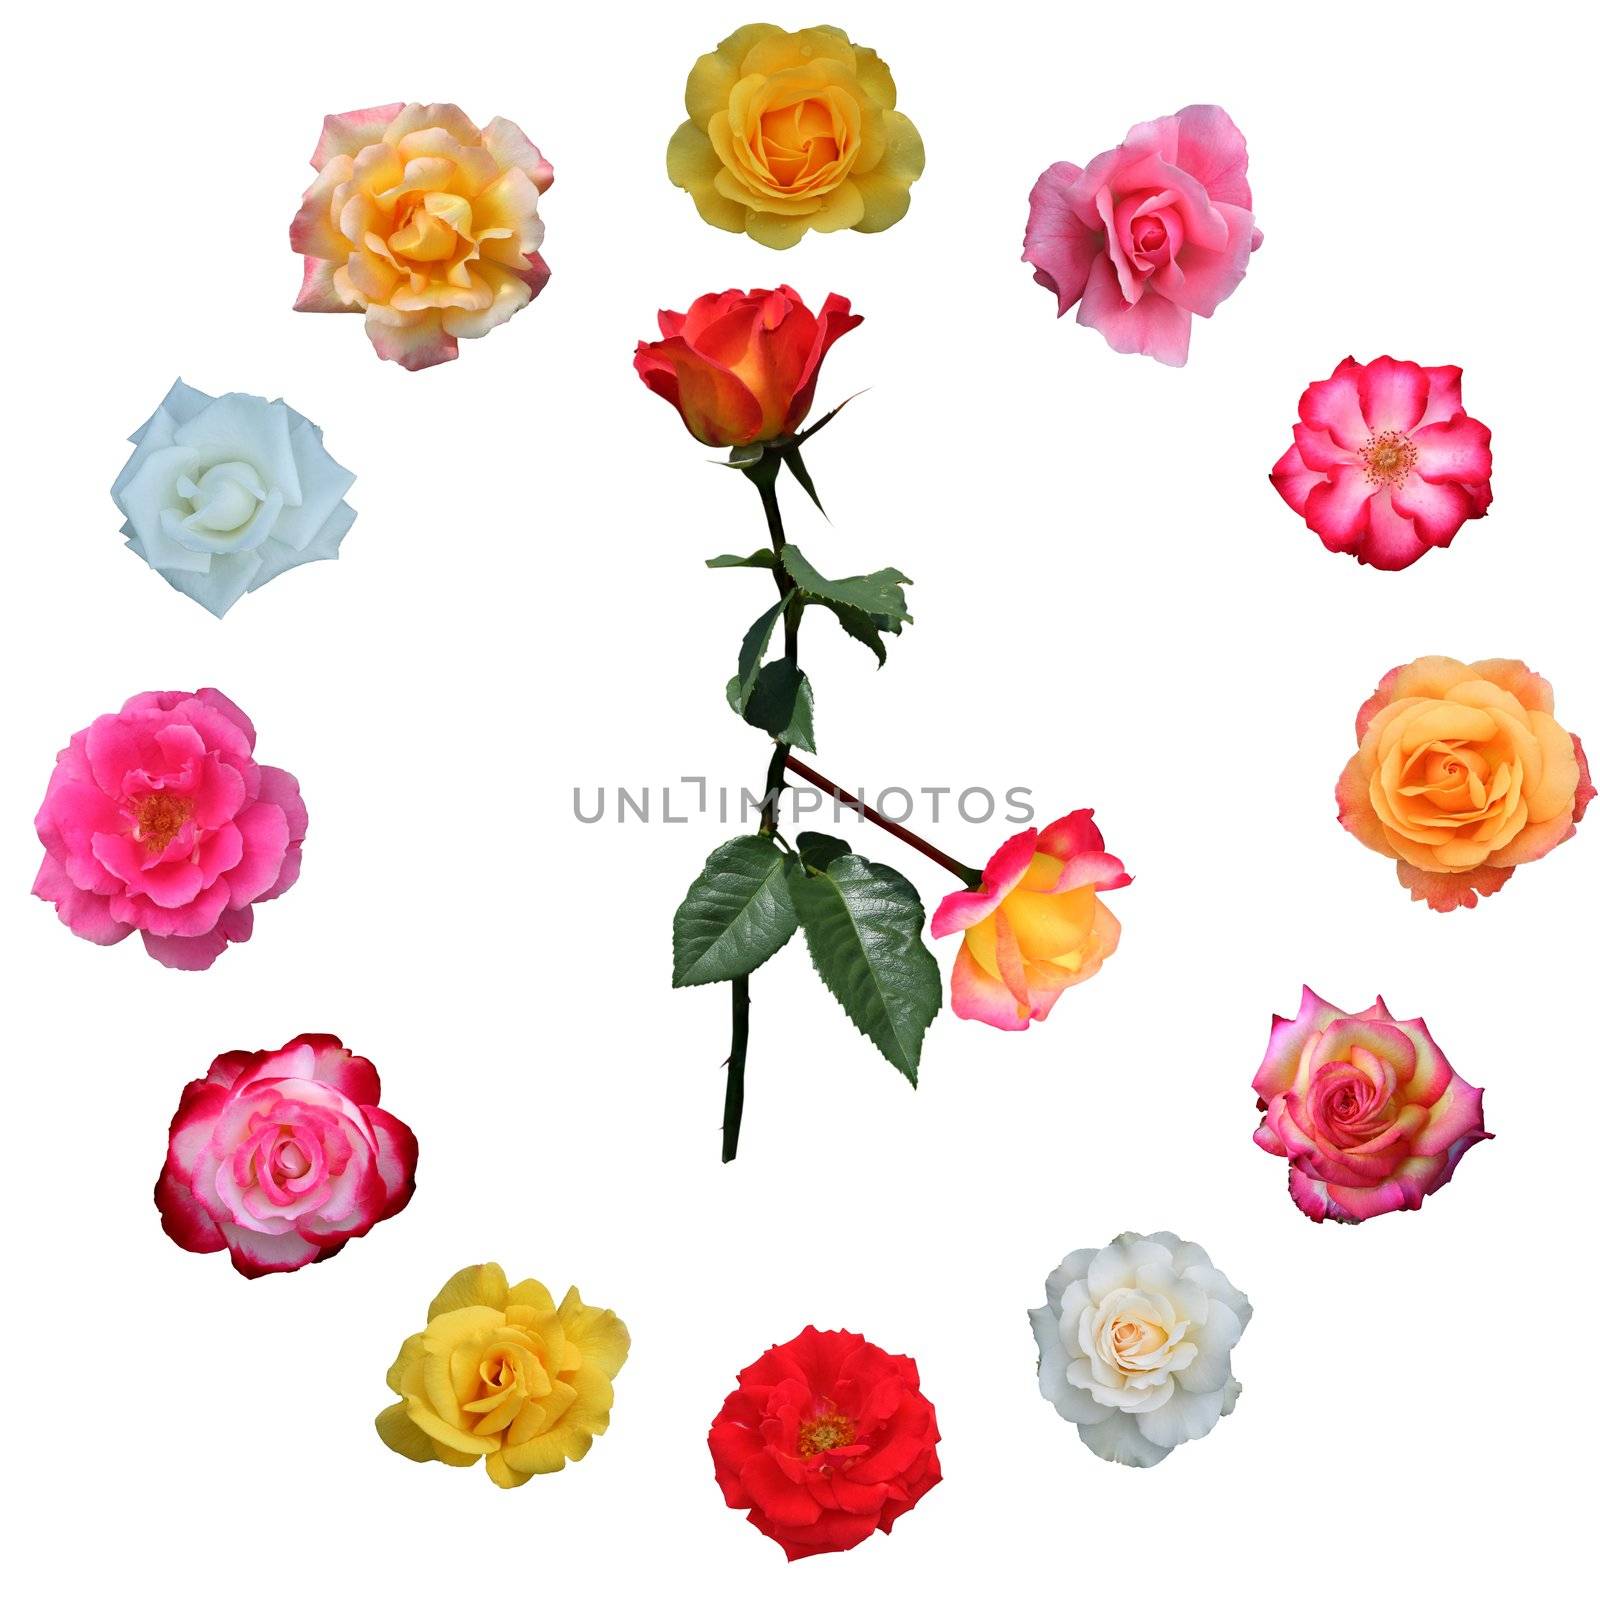 Clock face made of roses by jarenwicklund